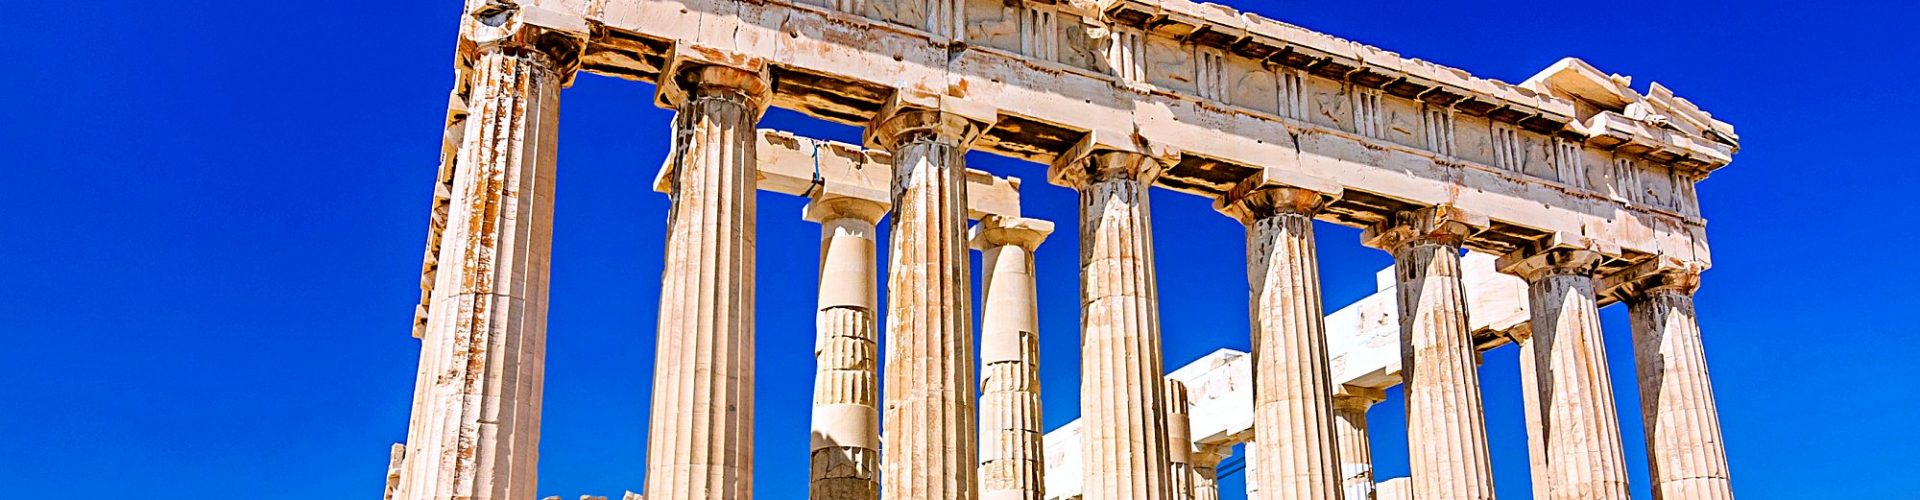 Top 10 Things to Do in Athens on a First Visit, Greece inner banner